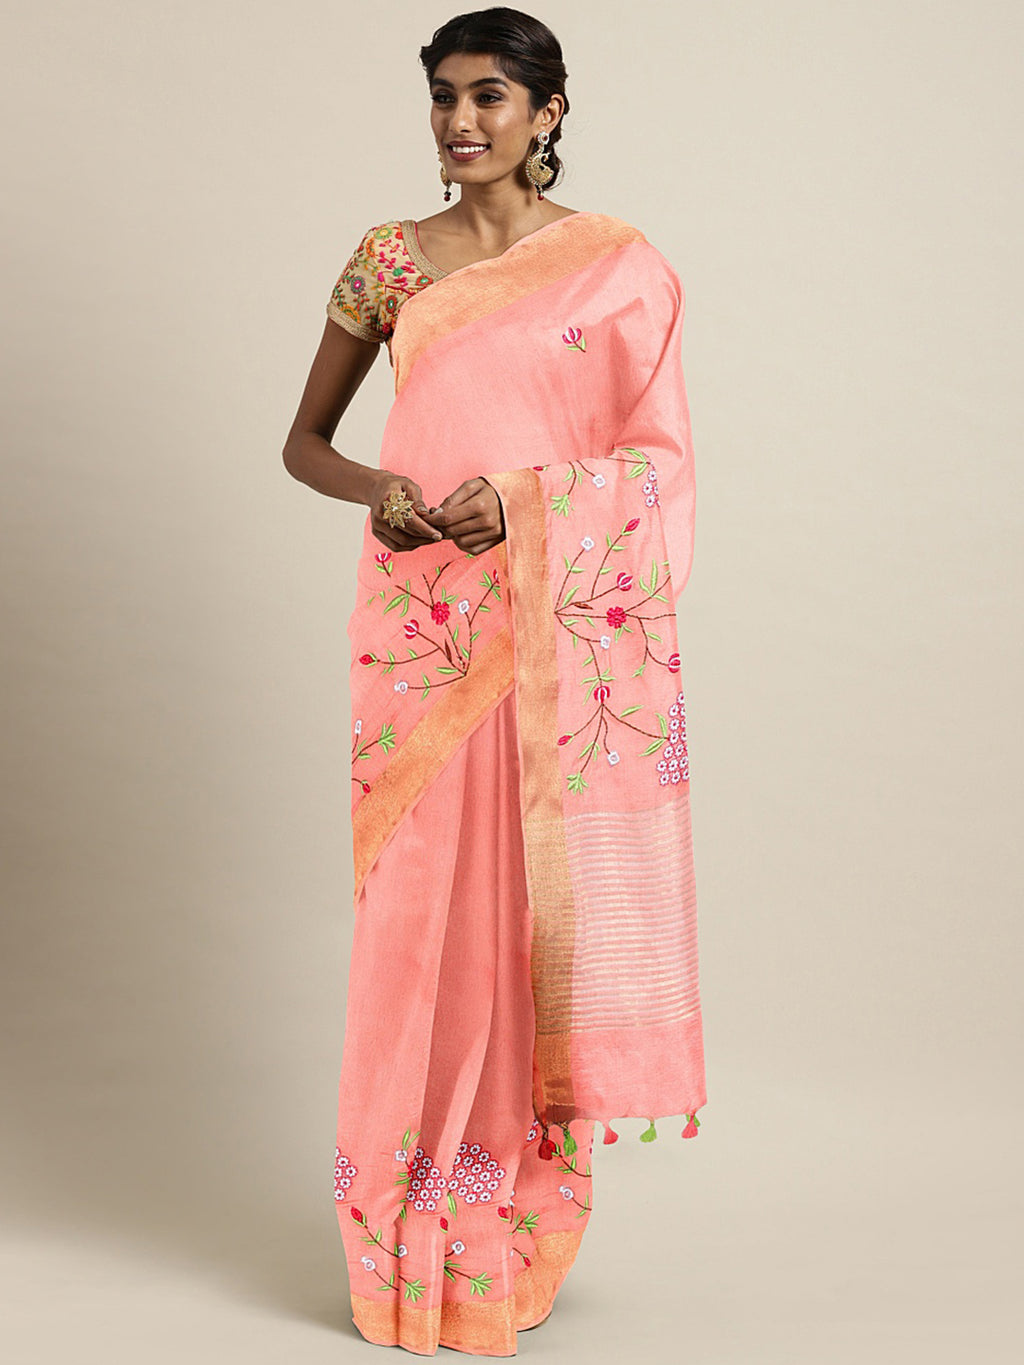 Kalakari India Kota Silk Embroidered Saree With Blouse ALBGSA0159-Saree-Kalakari India-ALBGSA0159-Geographical Indication, Hand Crafted, Heritage Prints, Linen, Natural Dyes, Pure Cotton, Sarees, Sustainable Fabrics, Woven-[Linen,Ethnic,wear,Fashionista,Handloom,Handicraft,Indigo,blockprint,block,print,Cotton,Chanderi,Blue, latest,classy,party,bollywood,trendy,summer,style,traditional,formal,elegant,unique,style,hand,block,print, dabu,booti,gift,present,glamorous,affordable,collectible,Sari,Sare